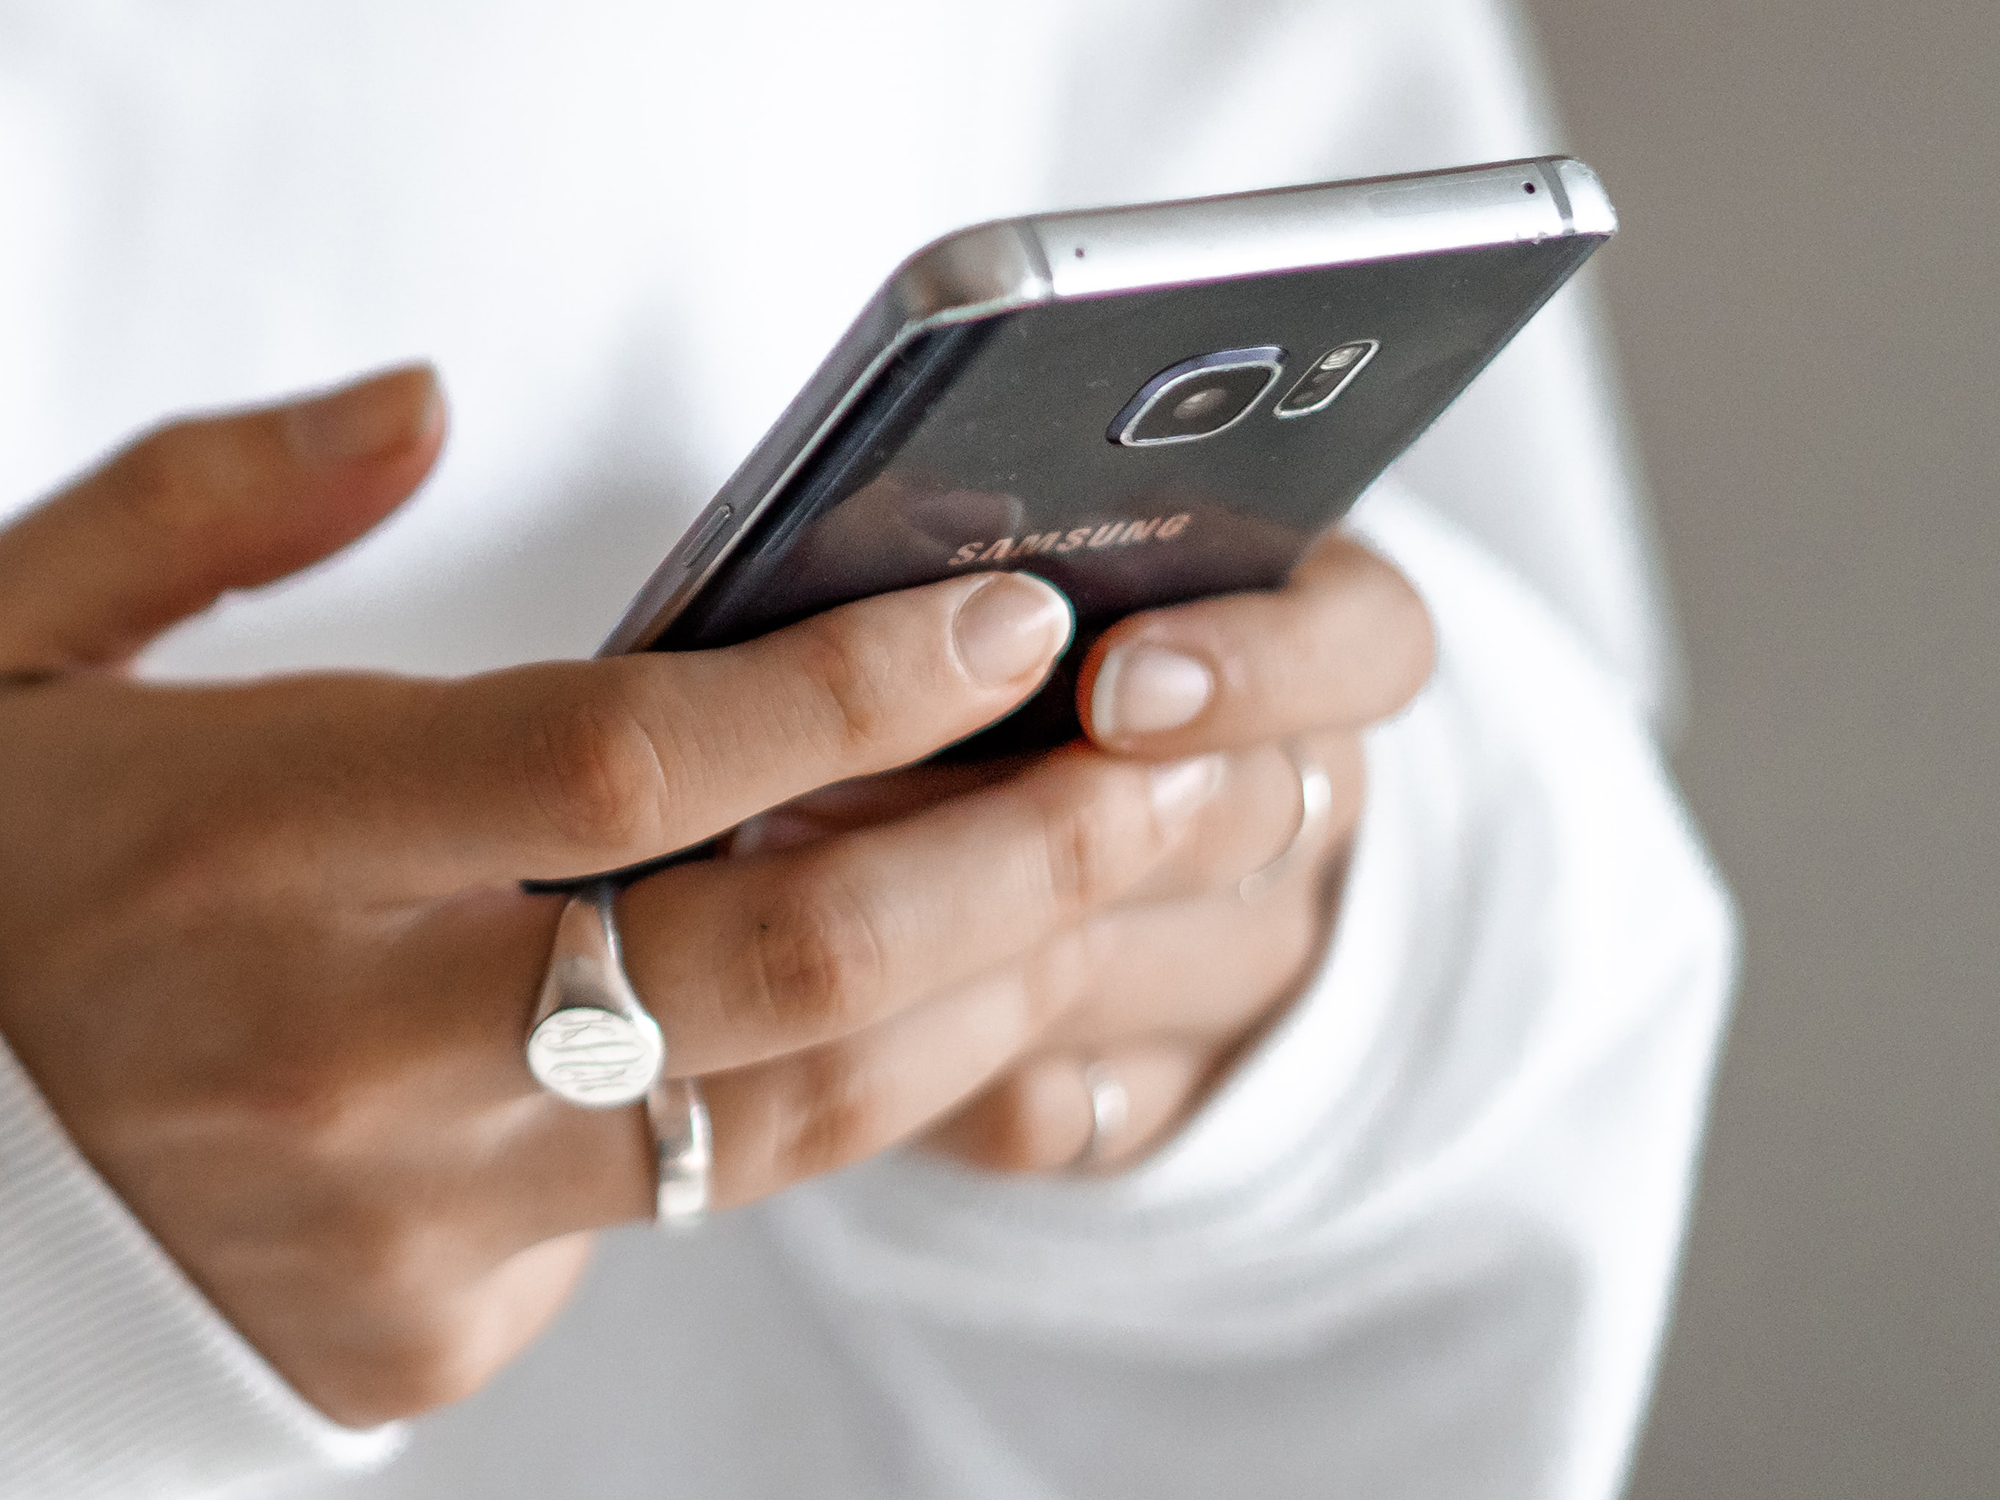 A person in a white shirt with a large ring on their finger holding a black Android phone.